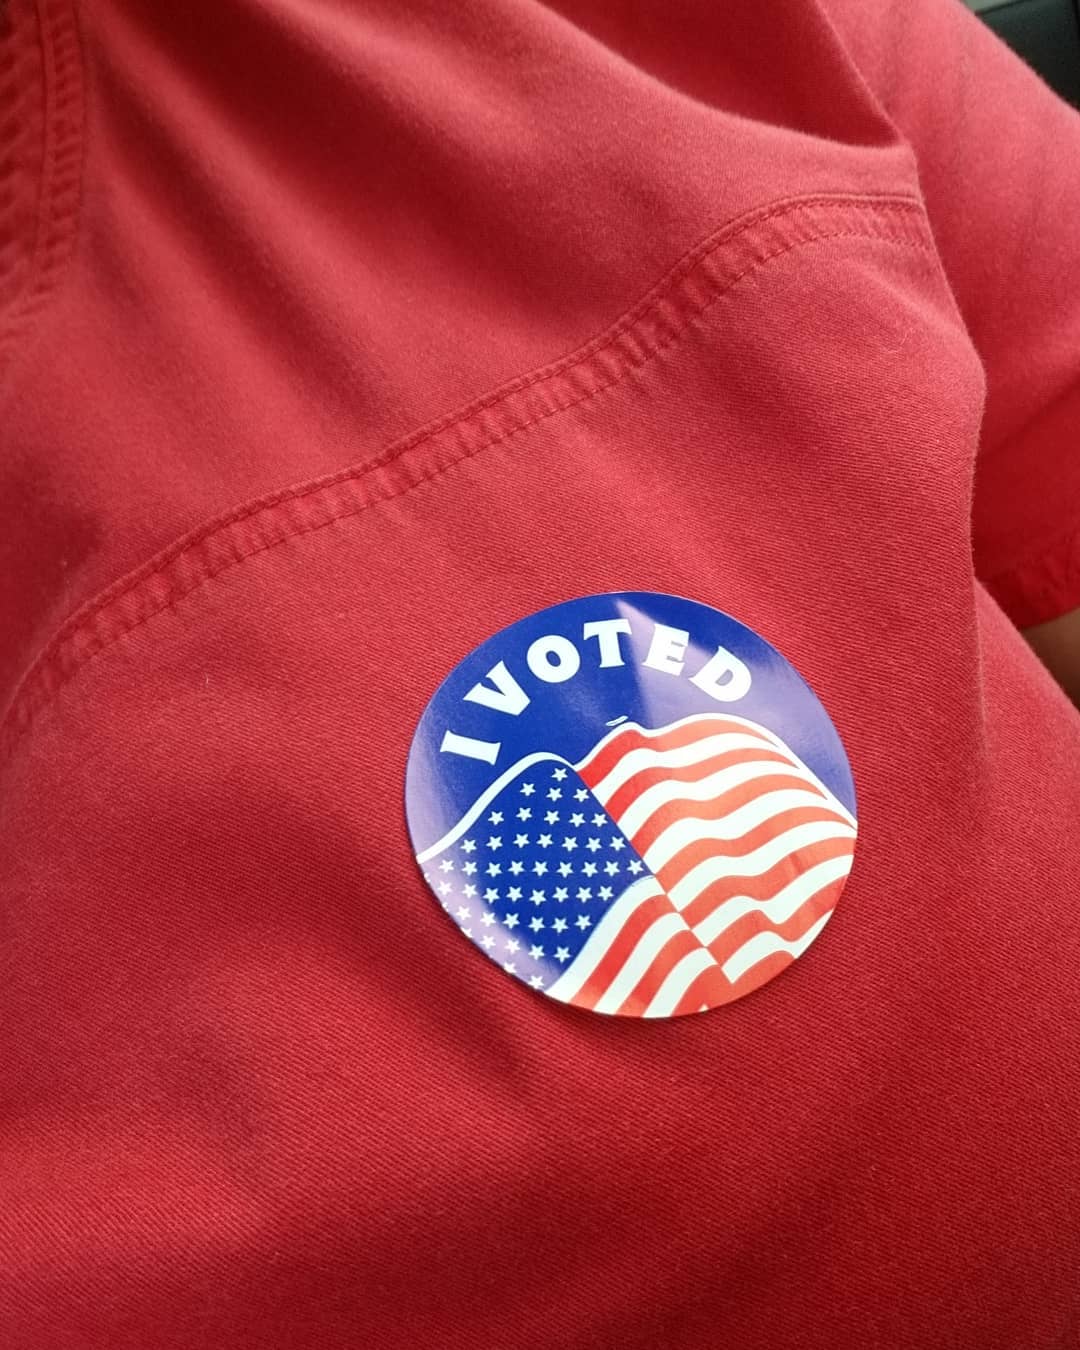 Woman wearing red t-shirt with I Voted sticker. Photo by Instagram user @lknjones